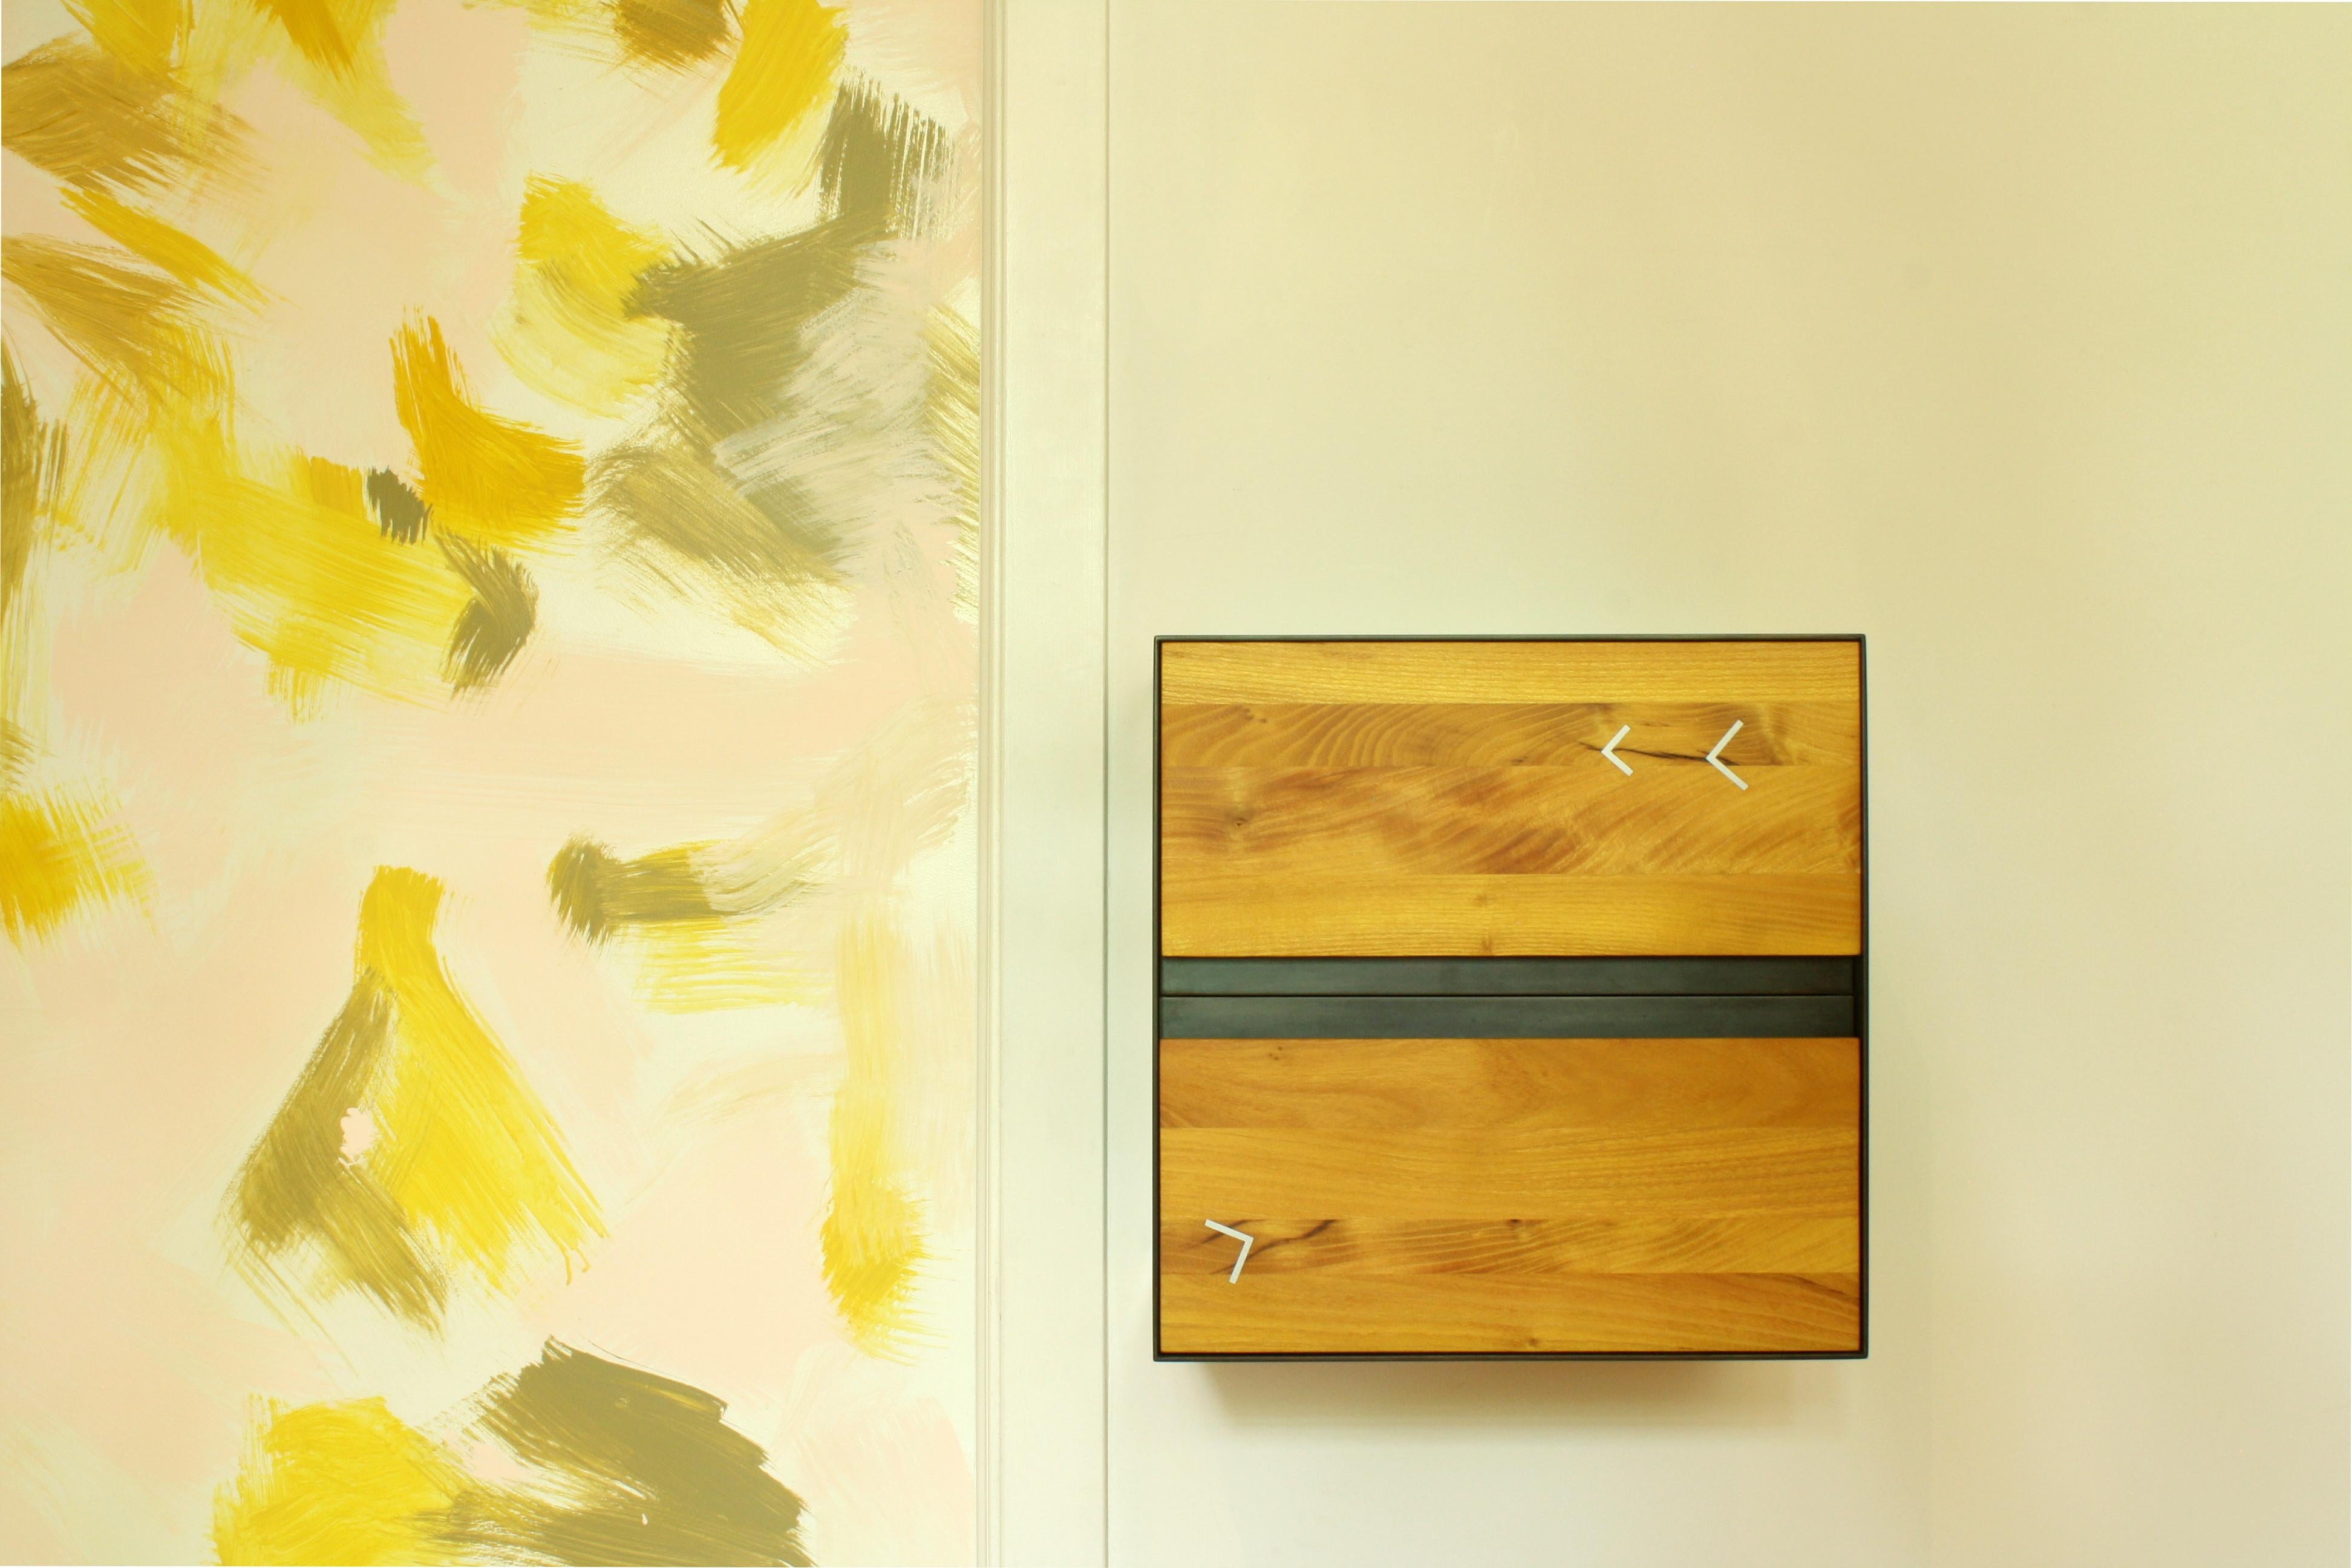 Shown in: osage orange with inlaid aluminum points and blackened steel

Listing price represents wall-mounted or 